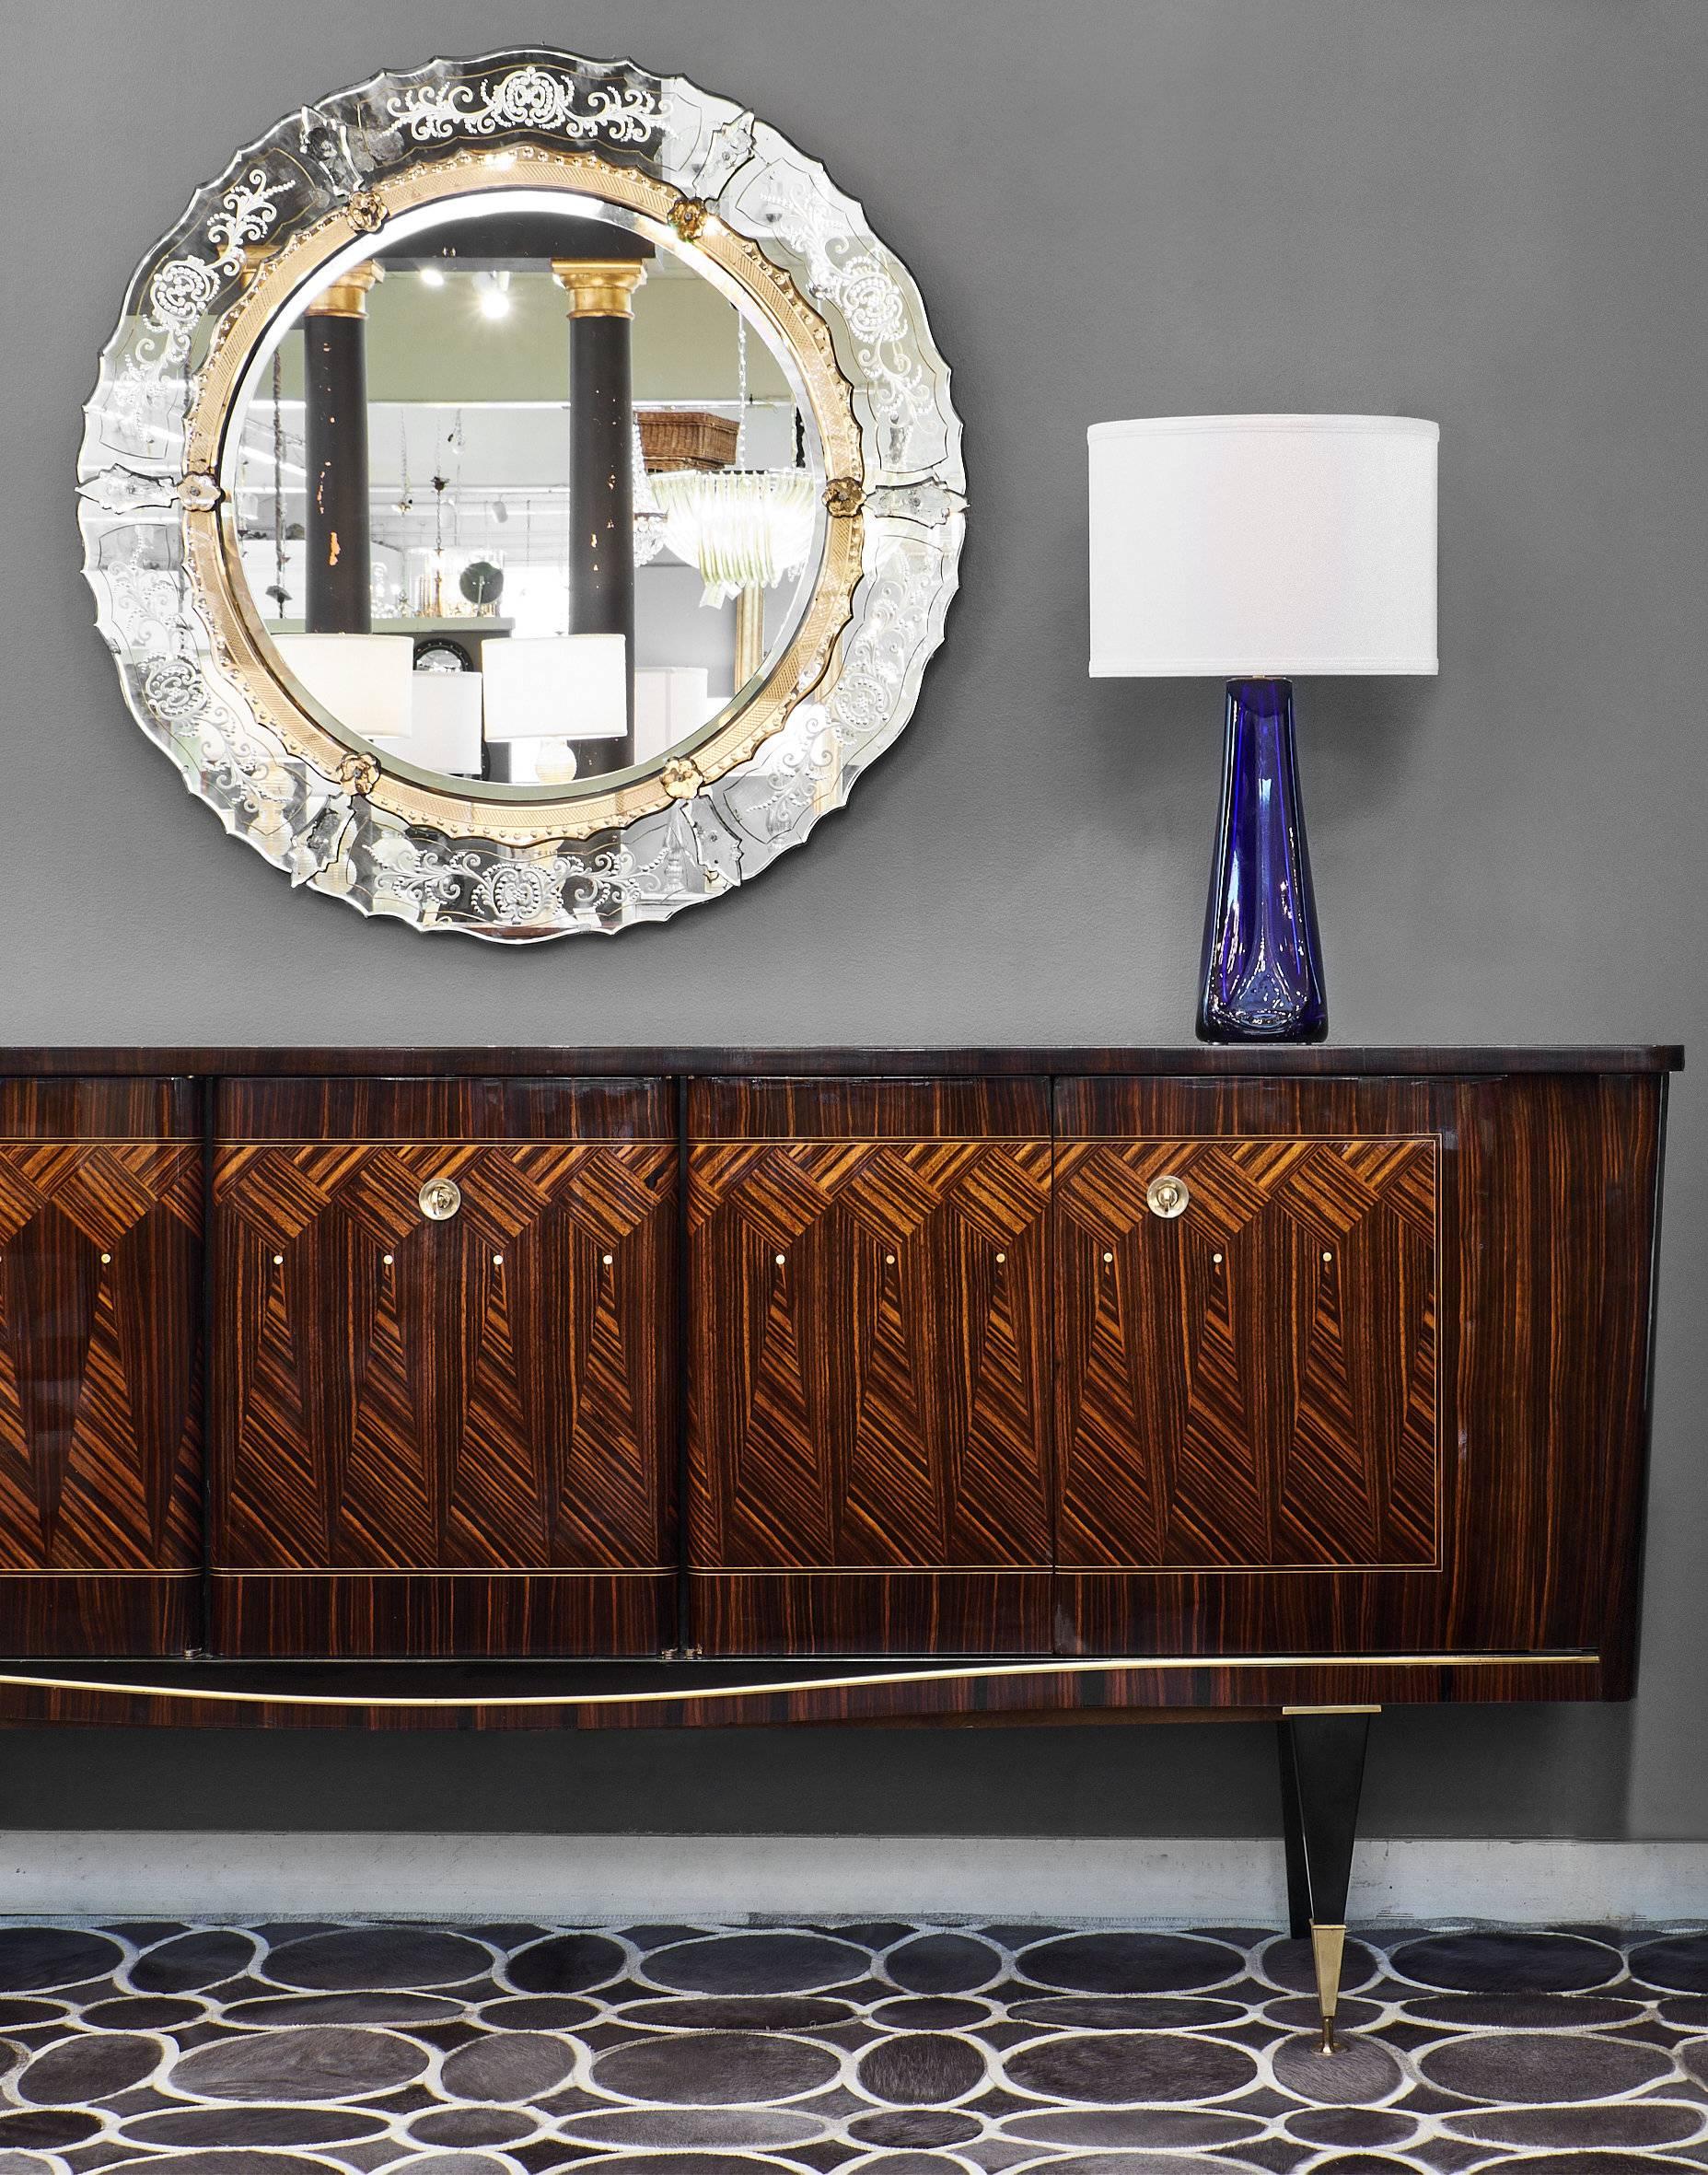 Impressive Mid-Century buffet from France made of Macassar of Ebony and inlaid with beautiful mother-of-pearl details. The facade of this buffet features geometric marquetry in a wonderful diamond pattern. The piece stands on tapered legs, and the